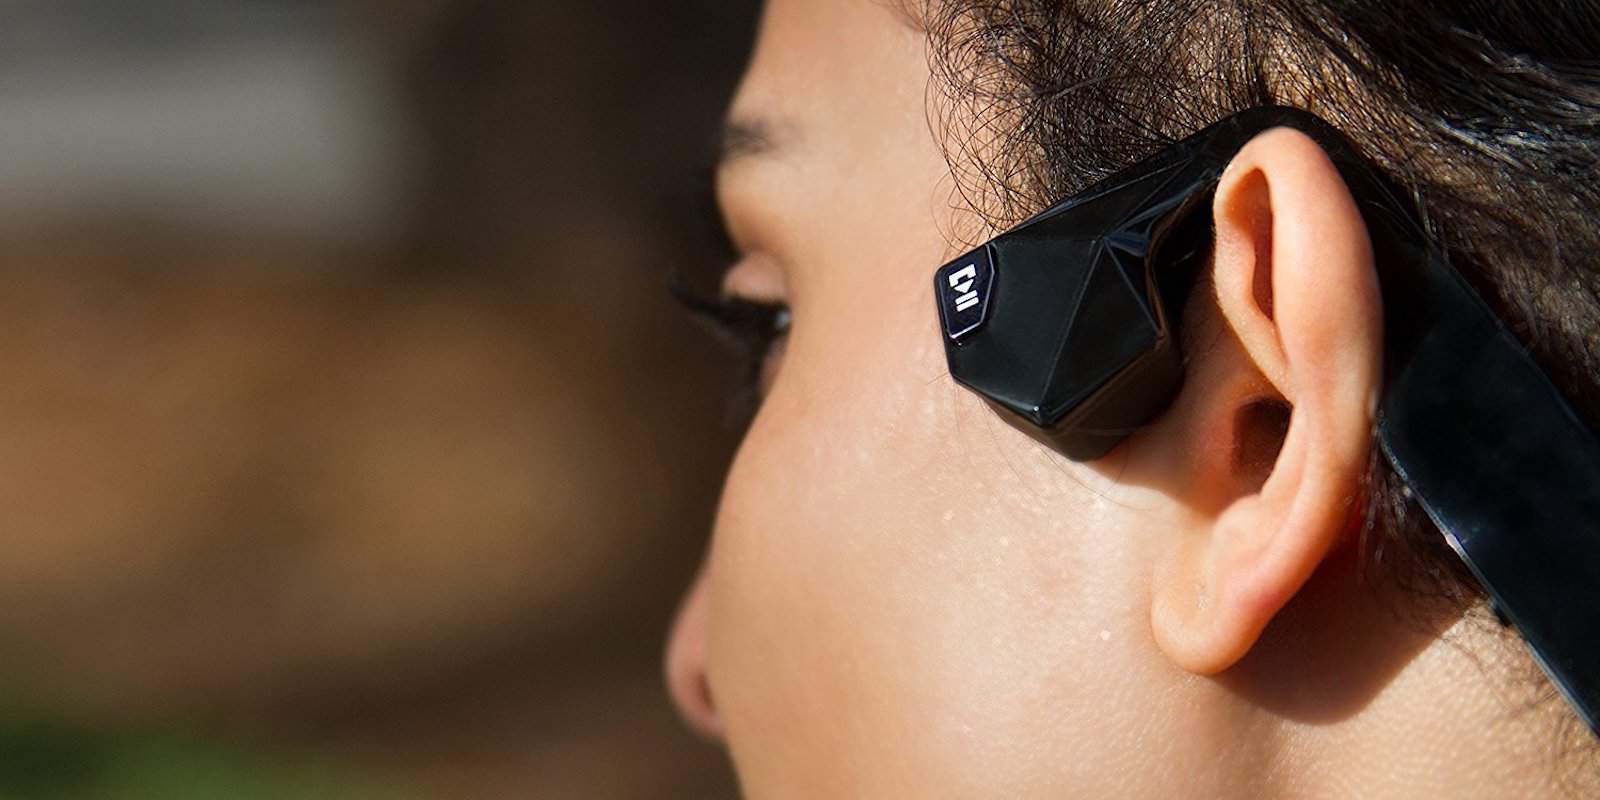 These bone-conduction headphones might be the future of personal audio.